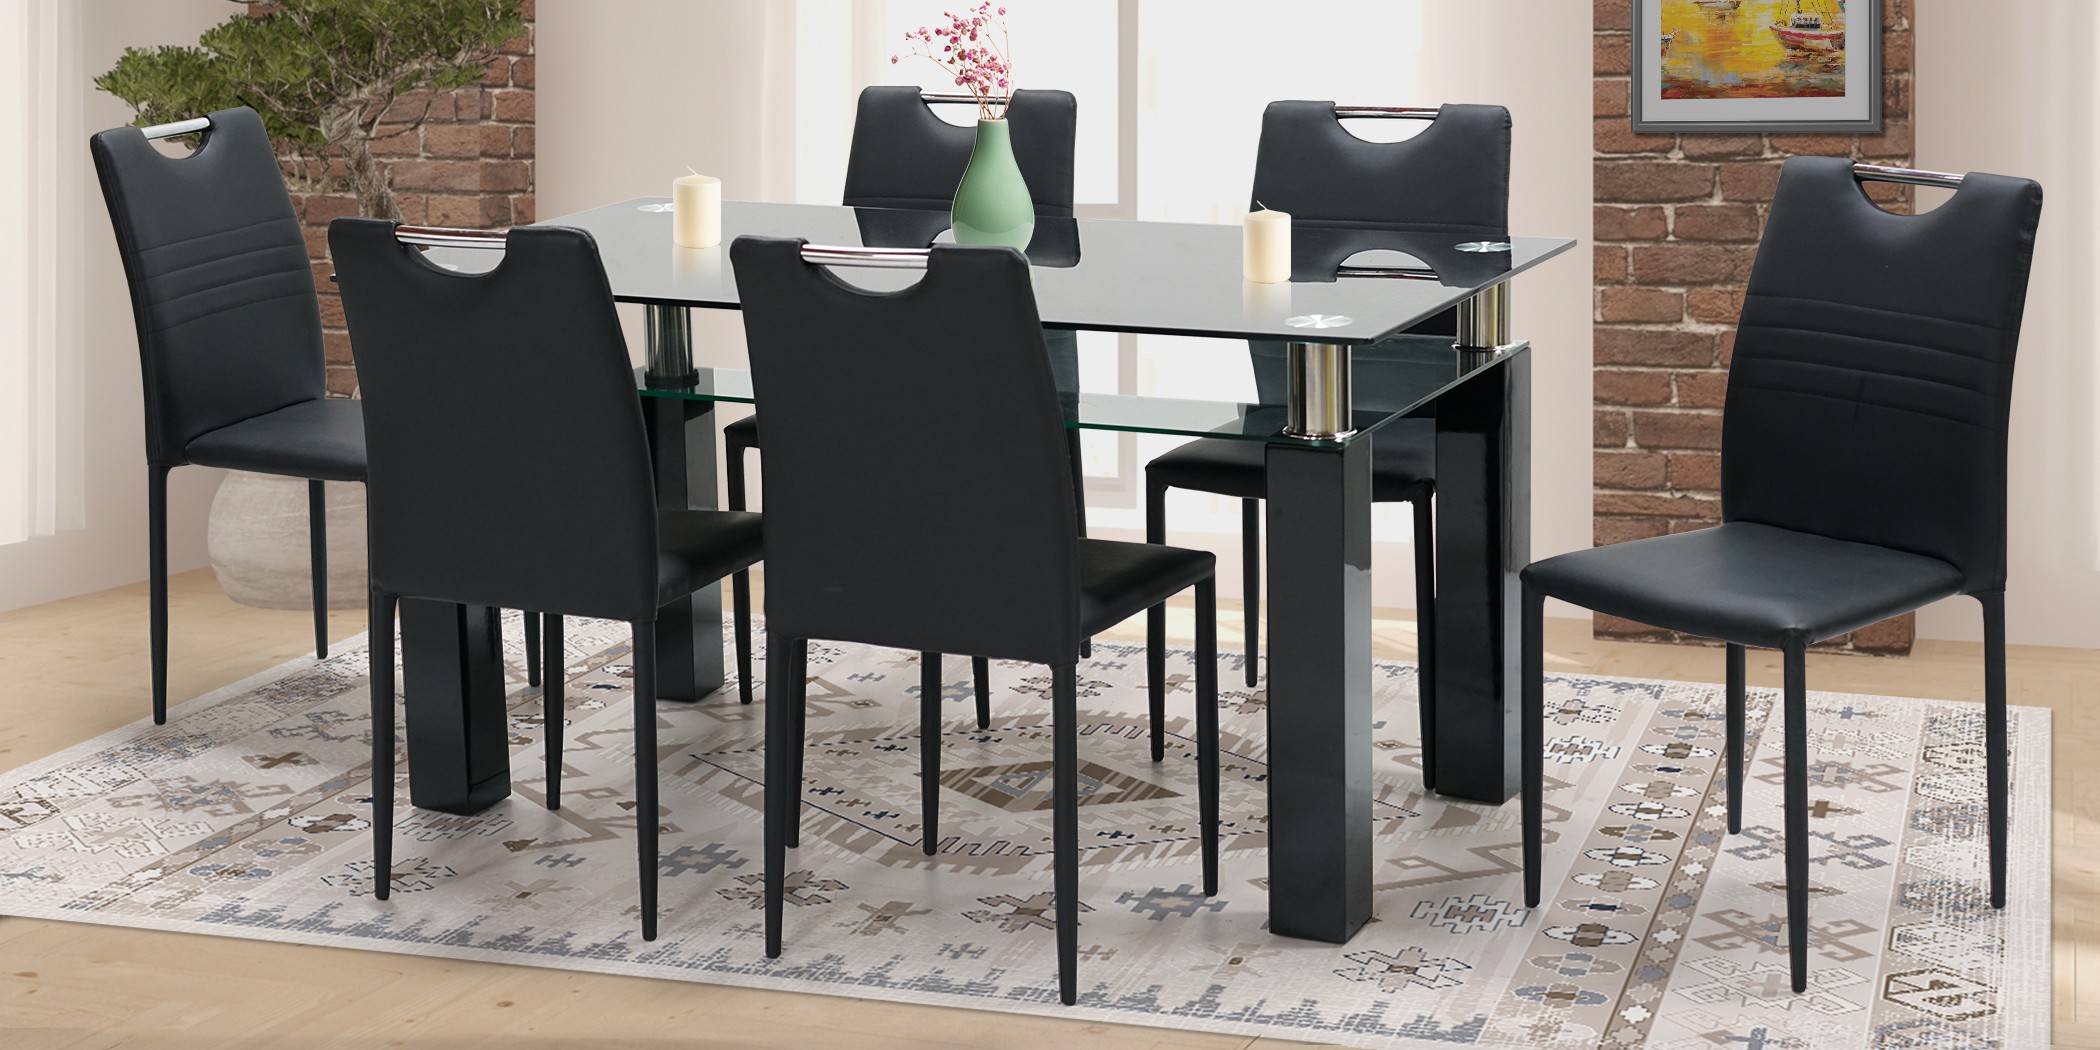 Antonella Table and 6 Chairs Glossy Black MDF